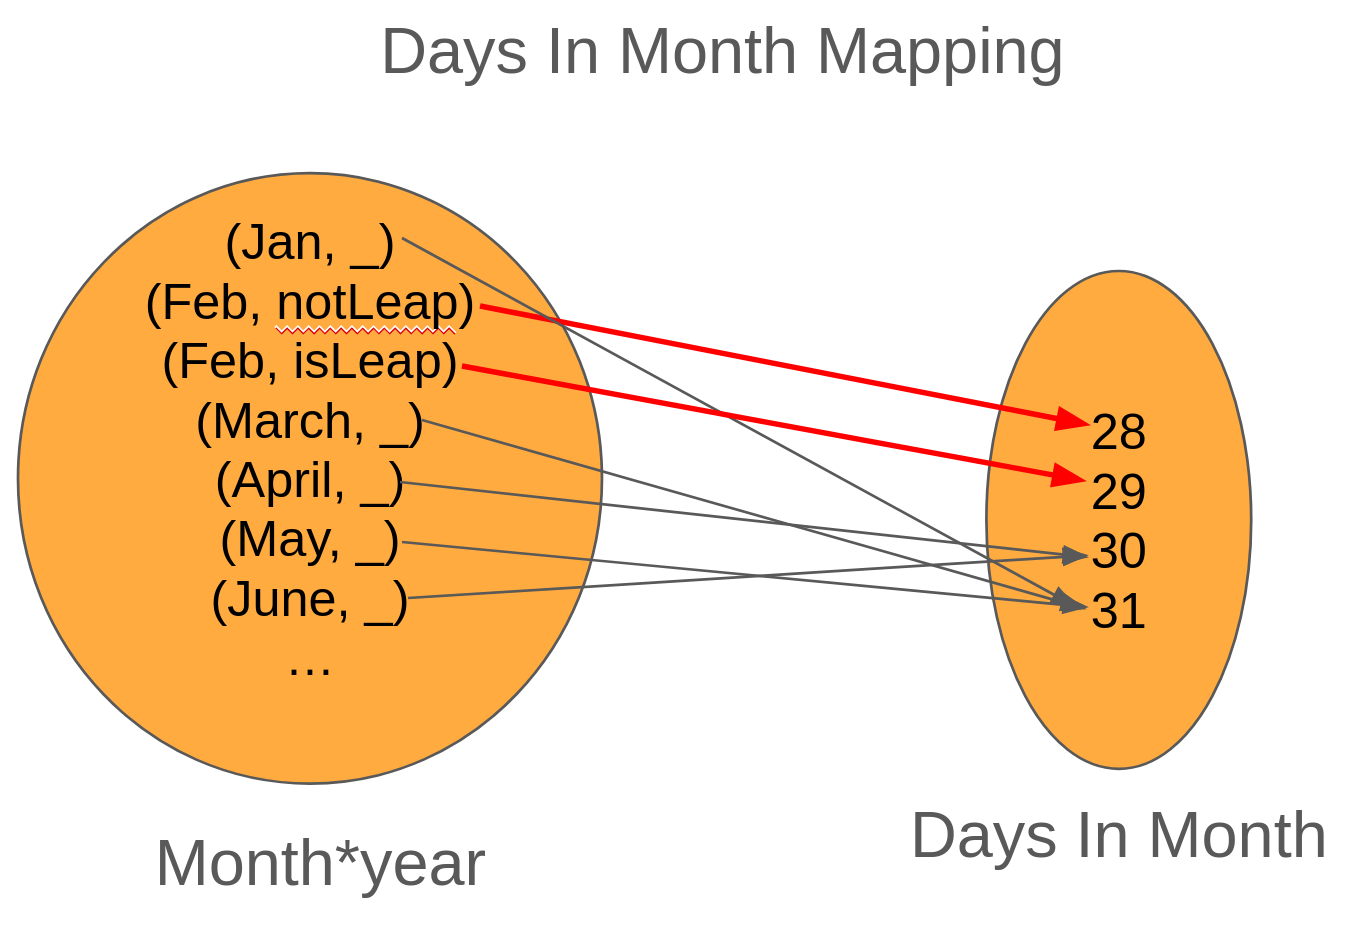 Fixed Mapping For Days In Month